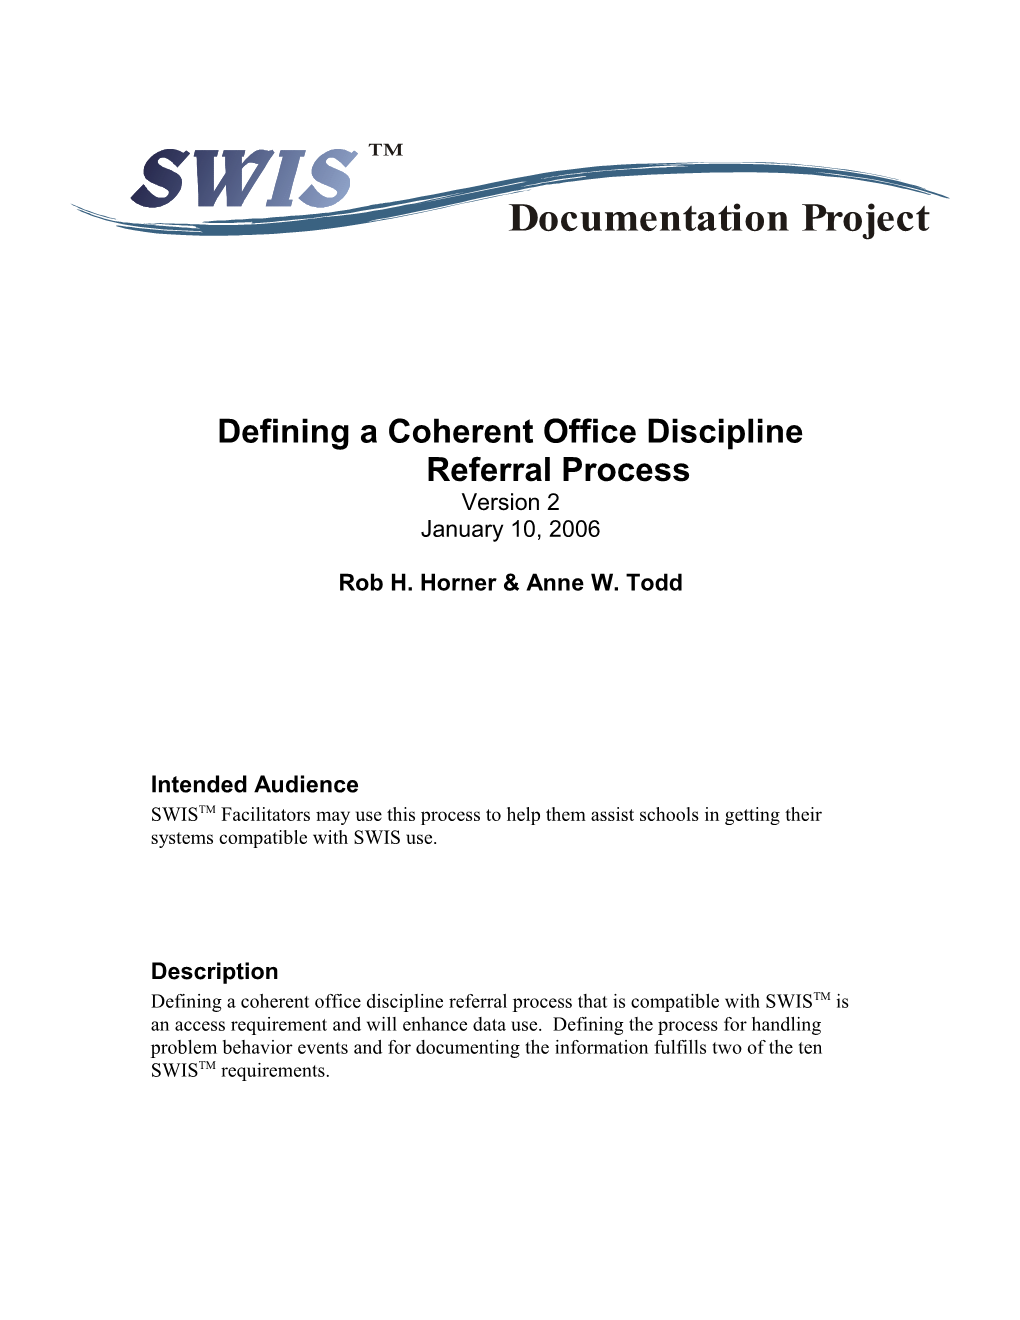 Defining a Coherent Office Discipline Referral Process